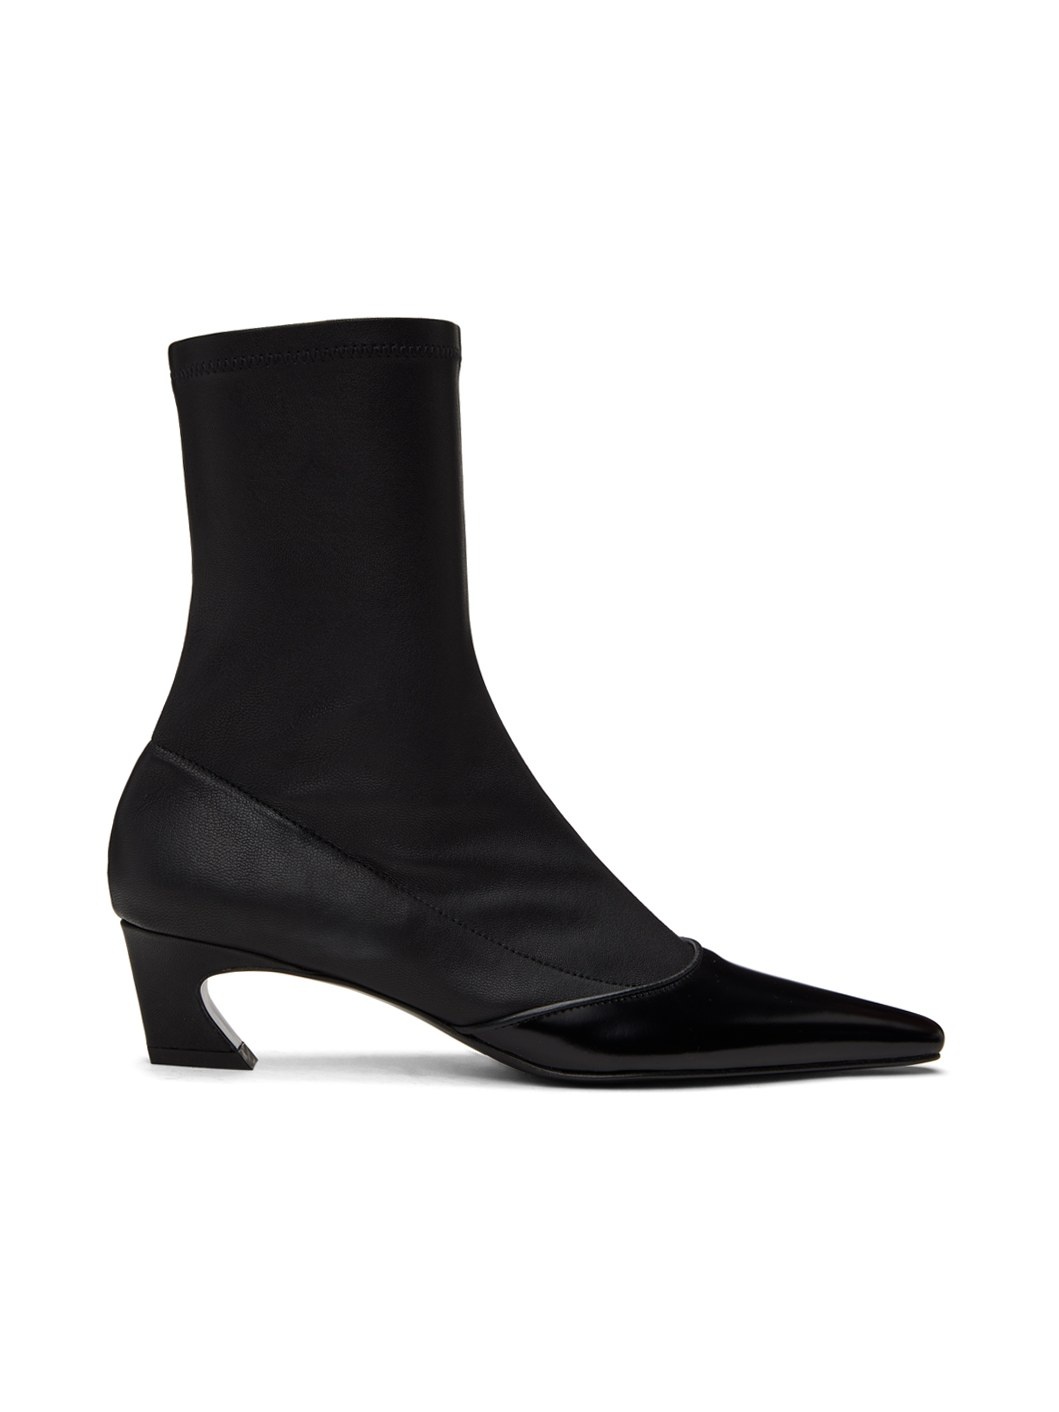 Black Heeled Ankle Boots - 1